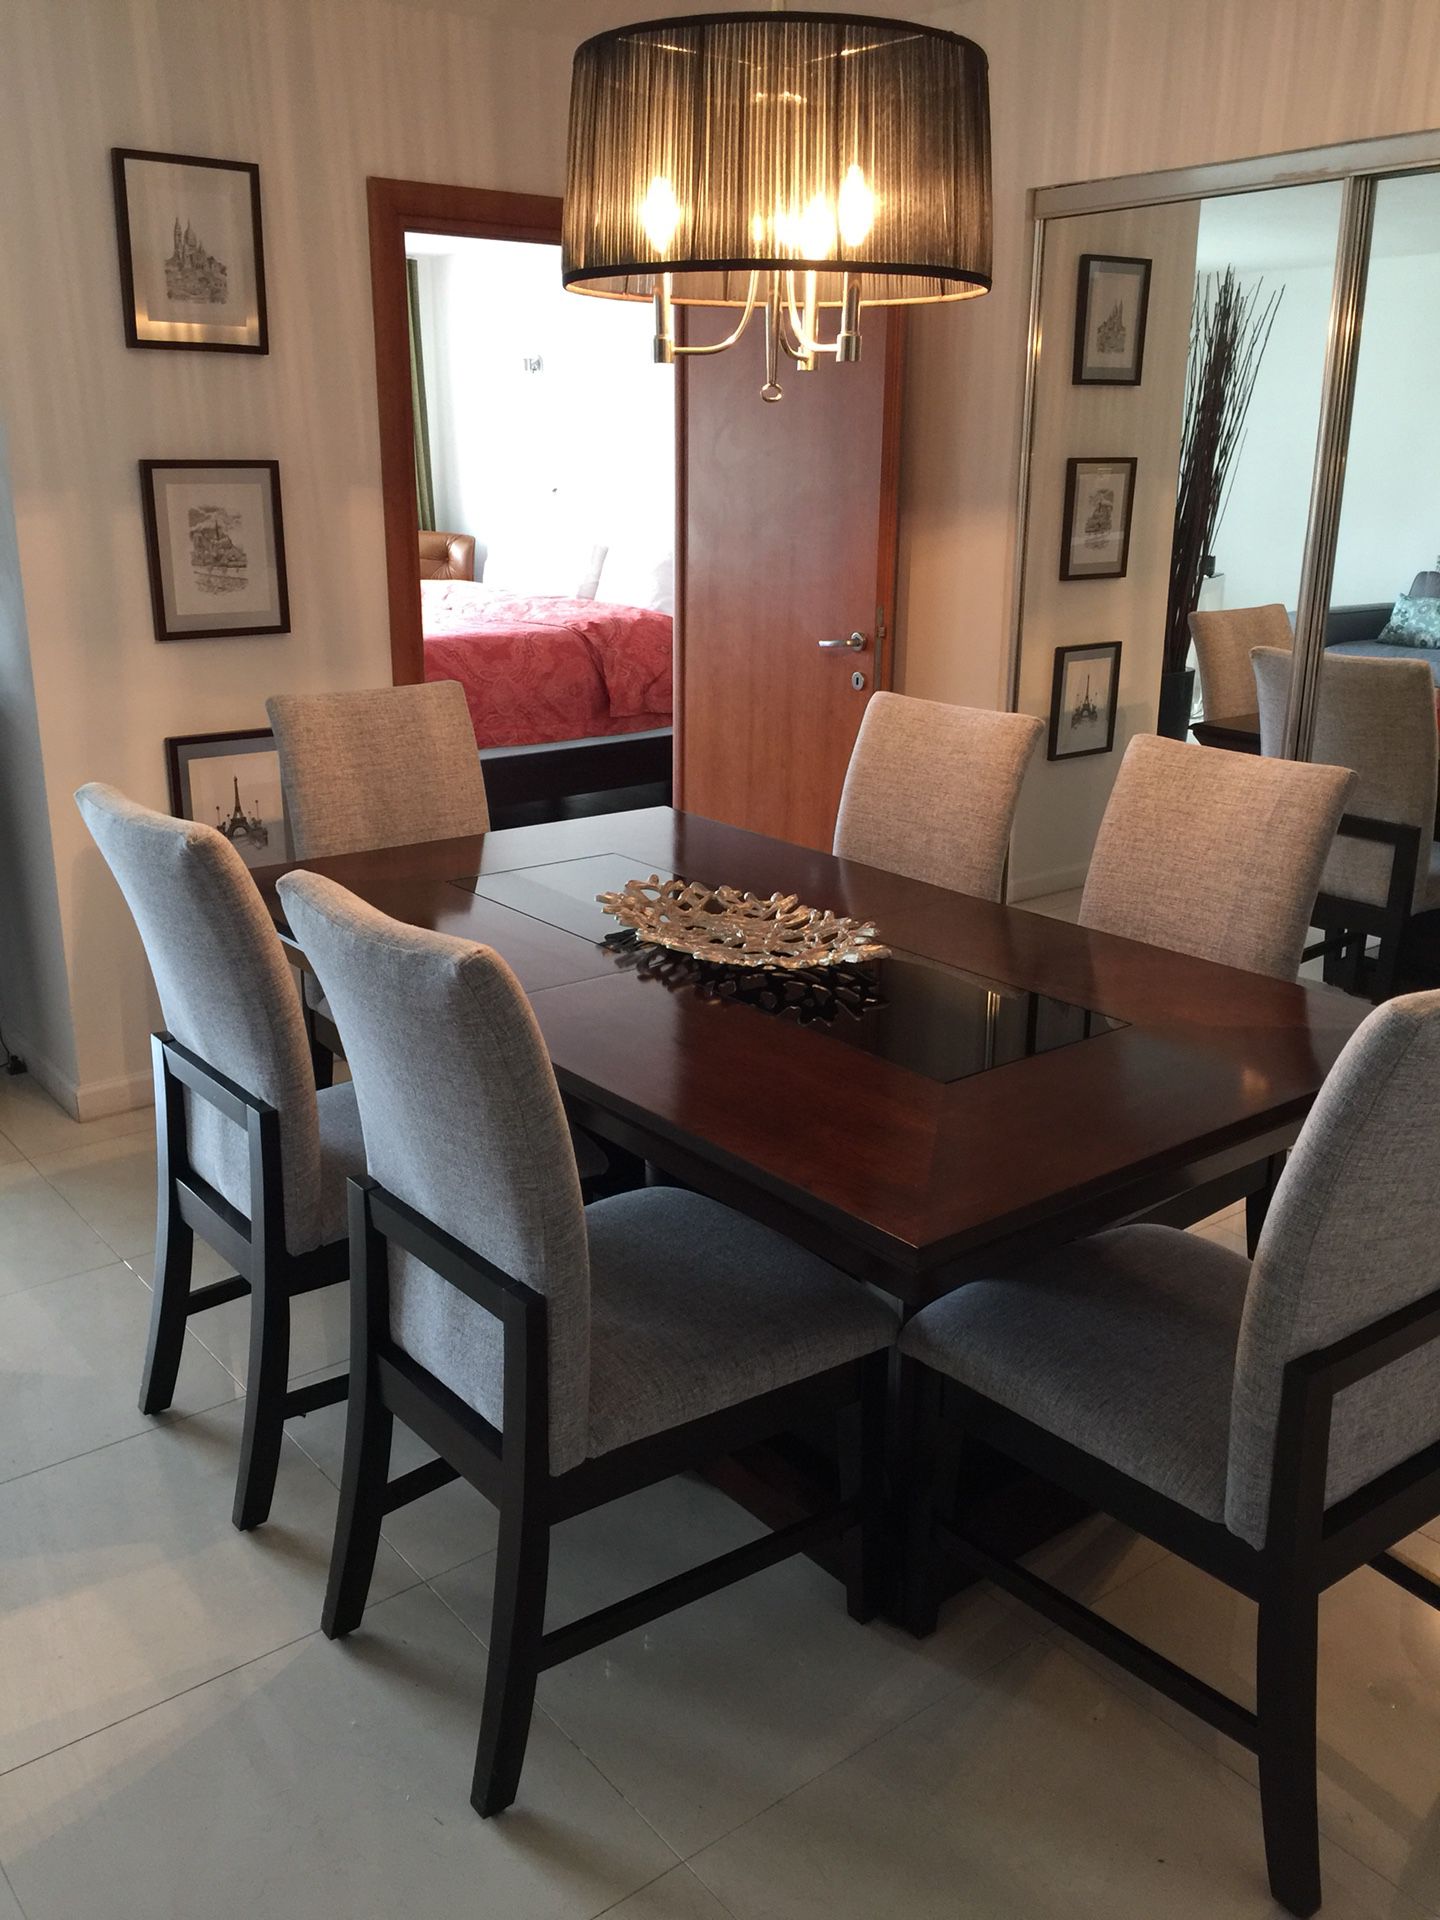 Dining table with 6 chairs, like new, It expands to accommodate 8 to 10 people.